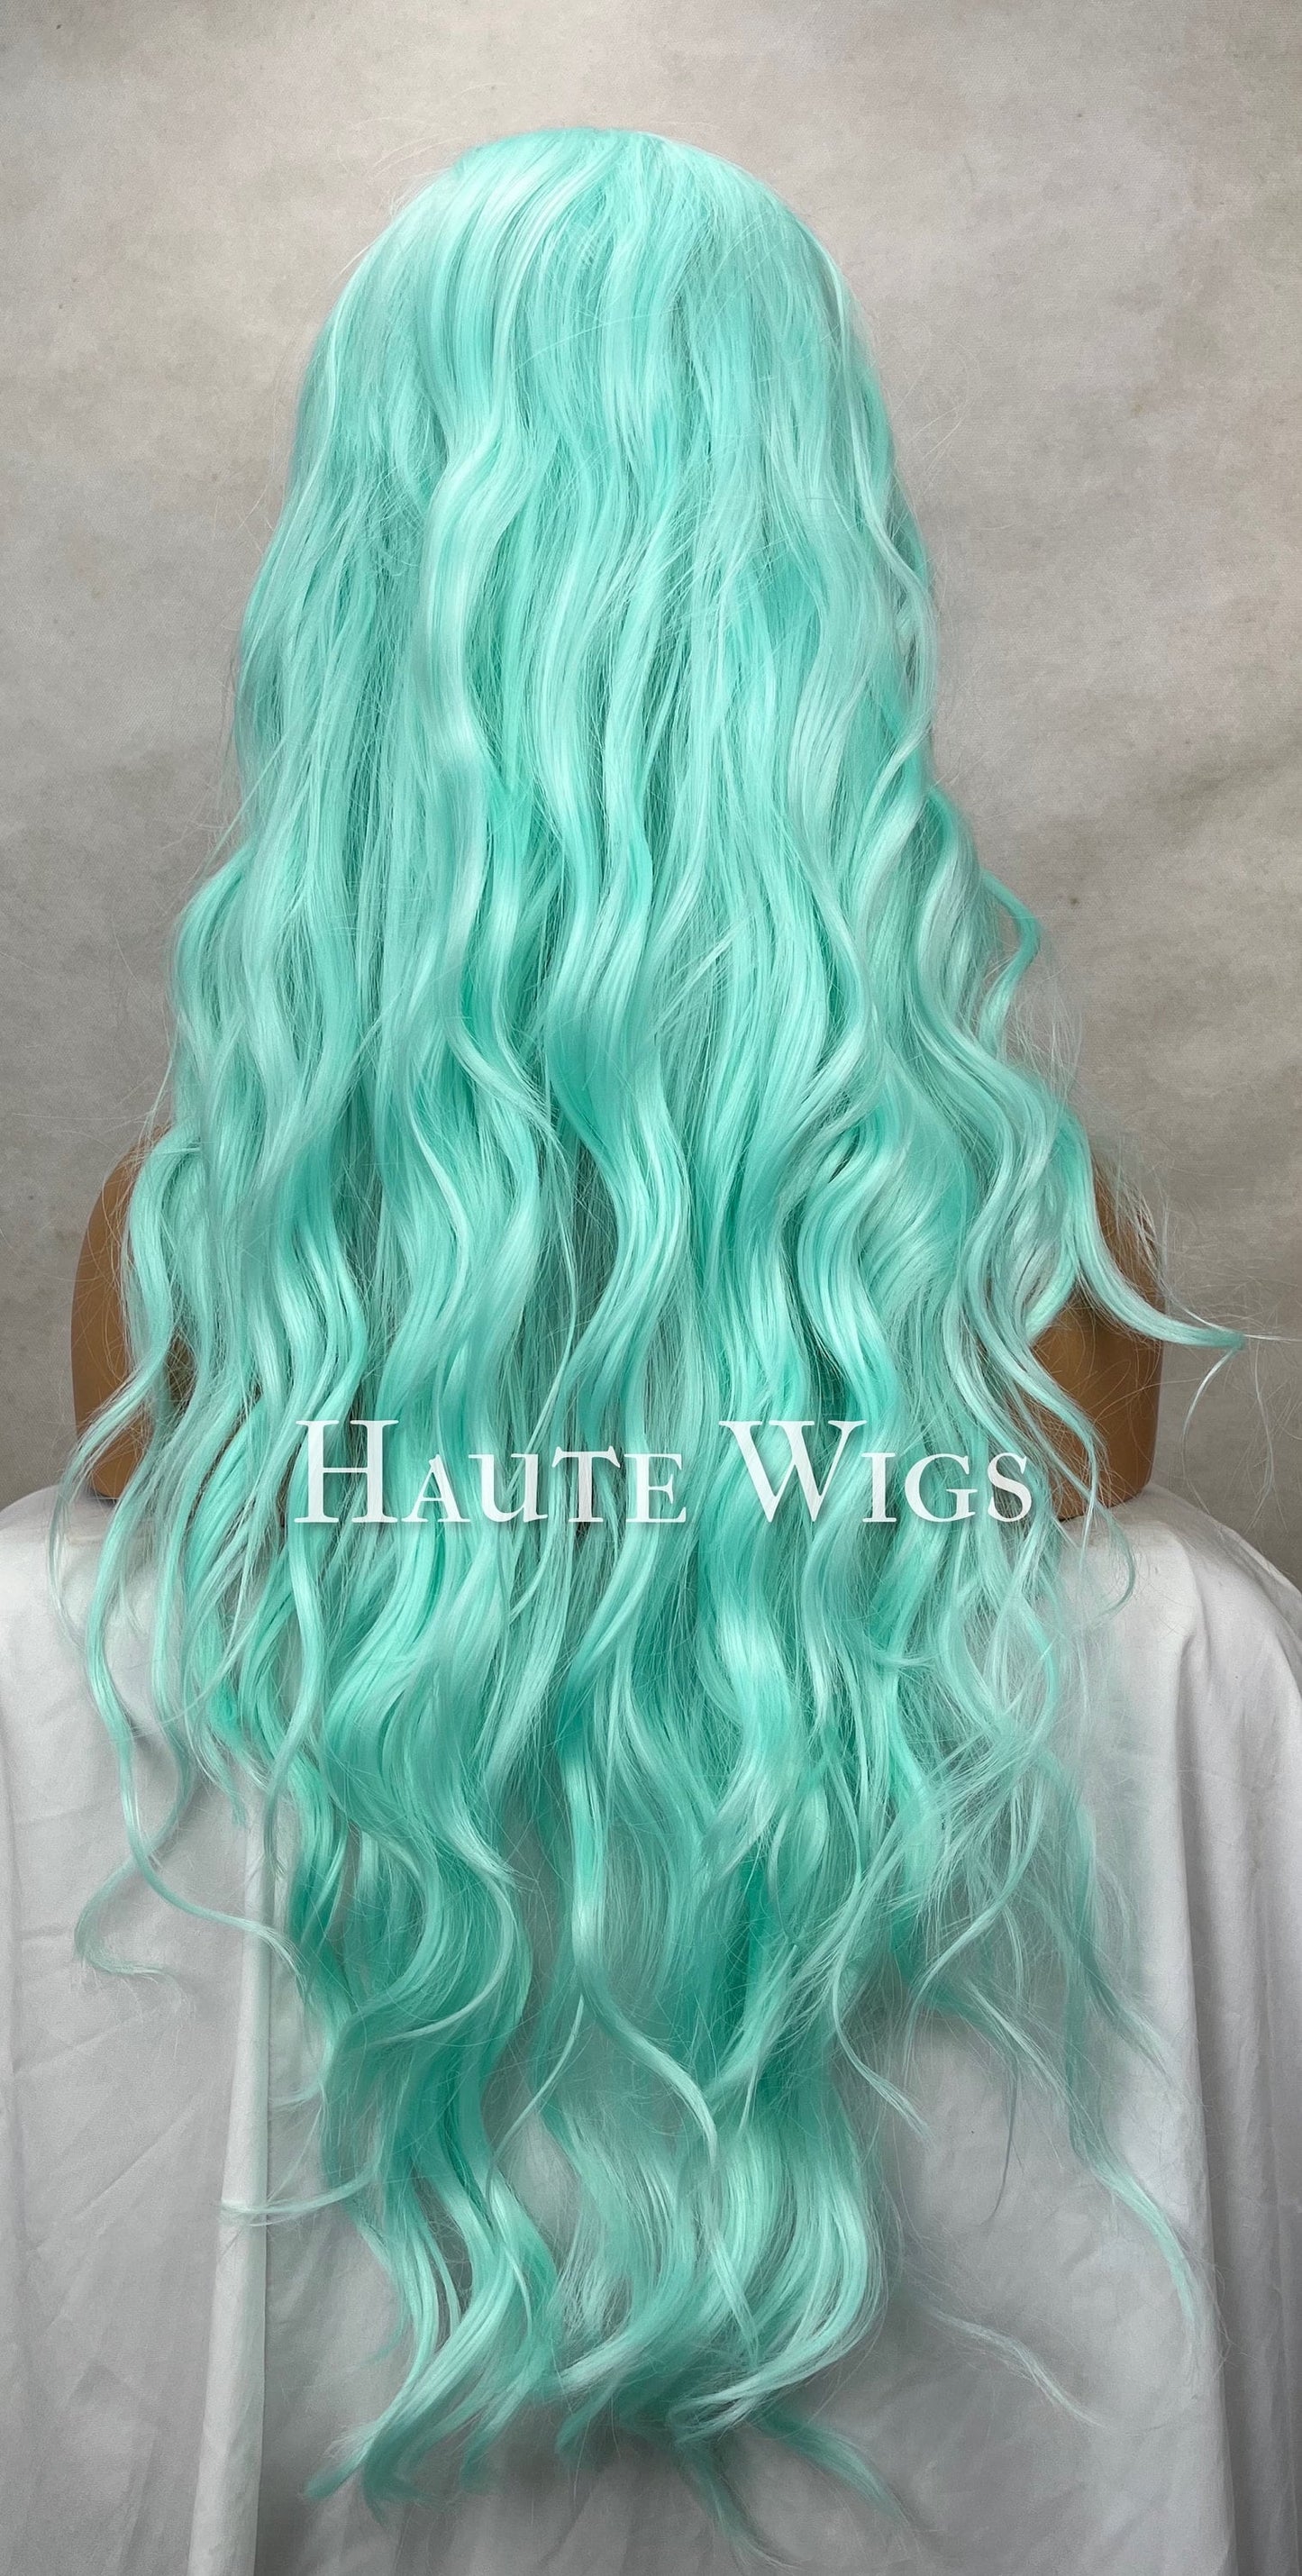 Aqua Mermaid Sea Green Blue Mix Wig With no lace front 32 Inches Long Wavy Curly Synthetic Vegan Womens Ladies Wigs - haute wigs